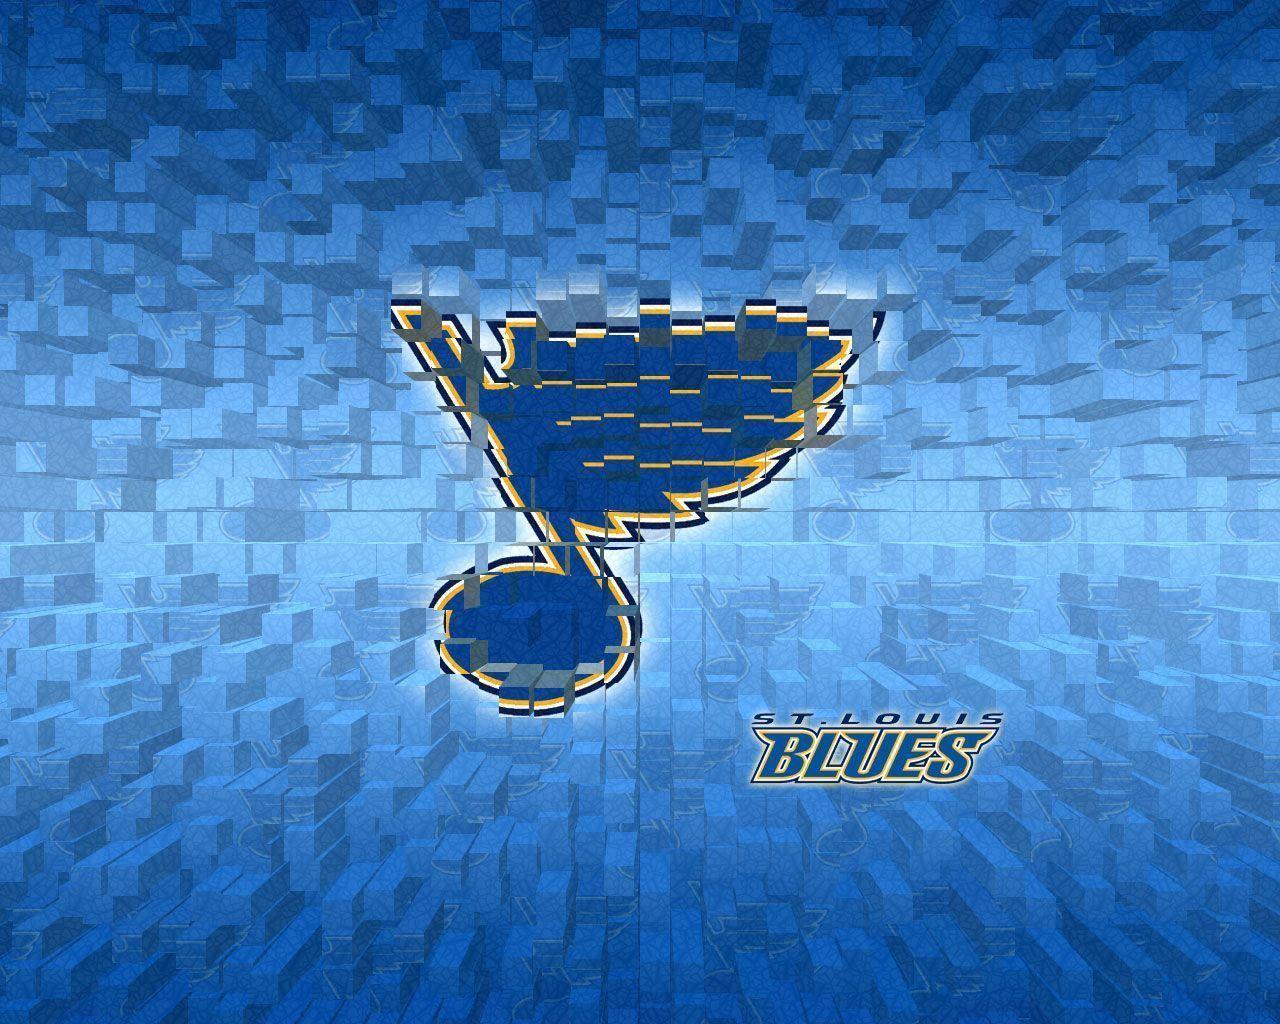 St. Louis Blues Wallpapers - Top Free